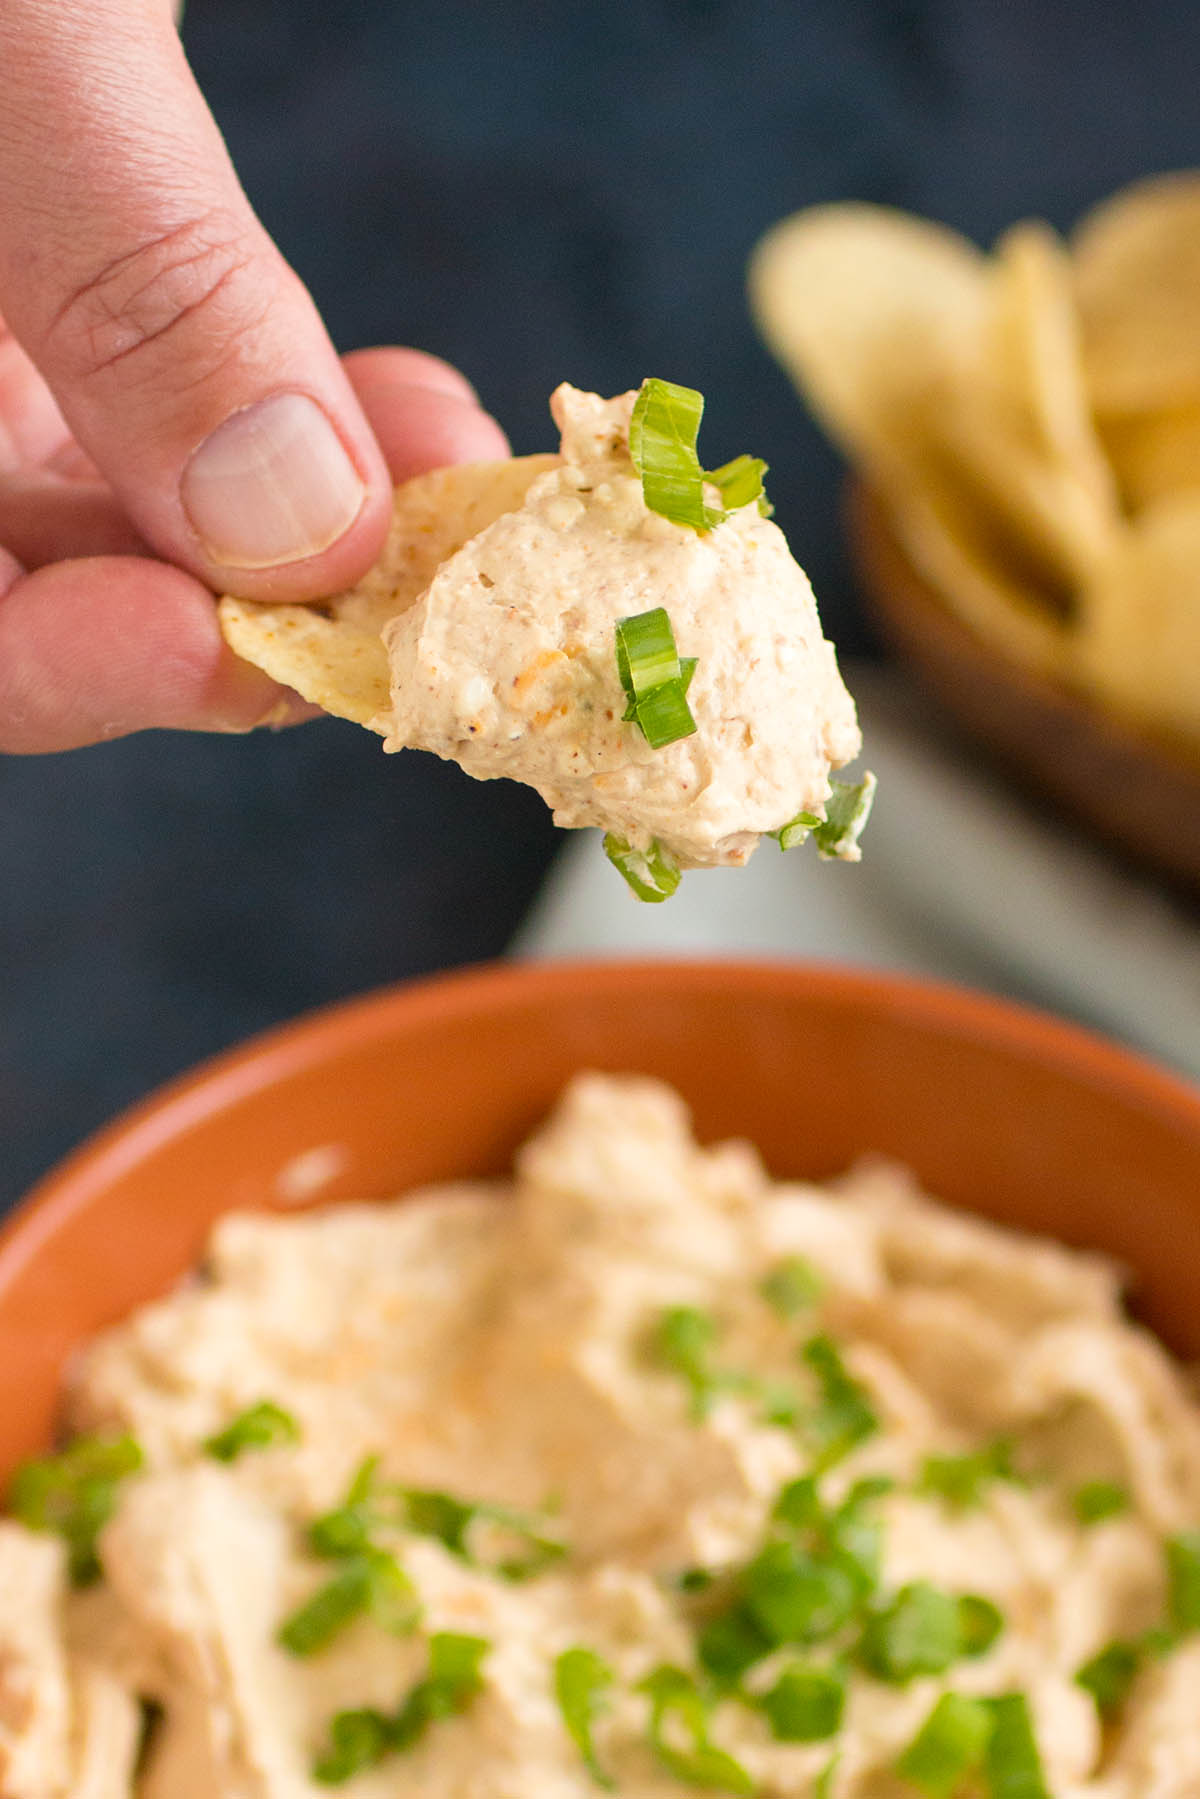 A chip full of the delicious spicy beer dip.